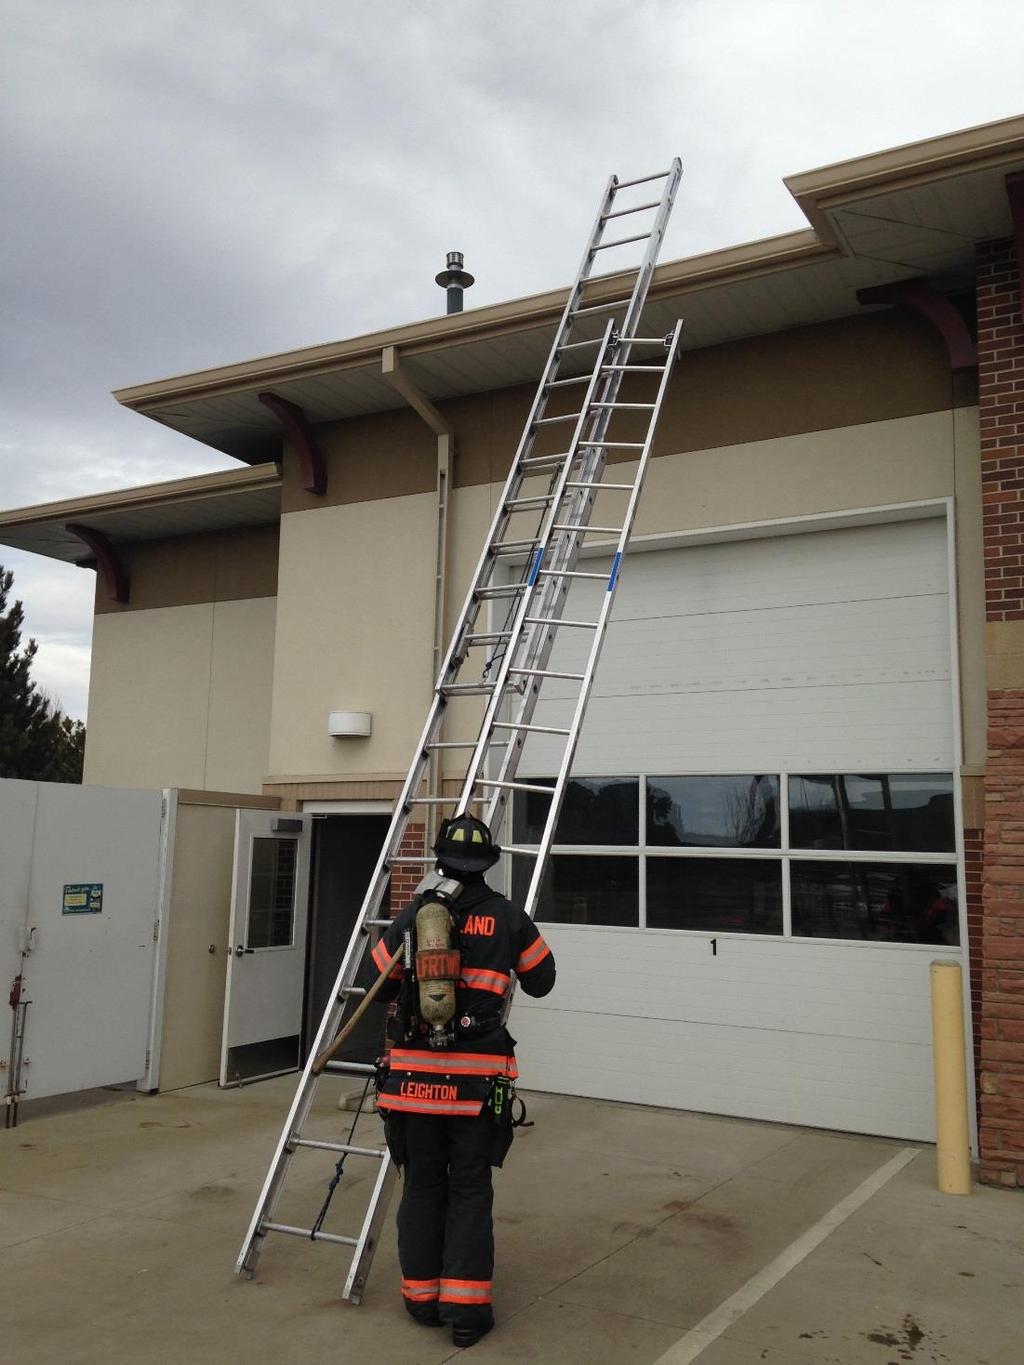 #13 Once the ladder is raised, hook it has high as you can on either the right or left of the extension ladder beam utilizing the open roof hooks.